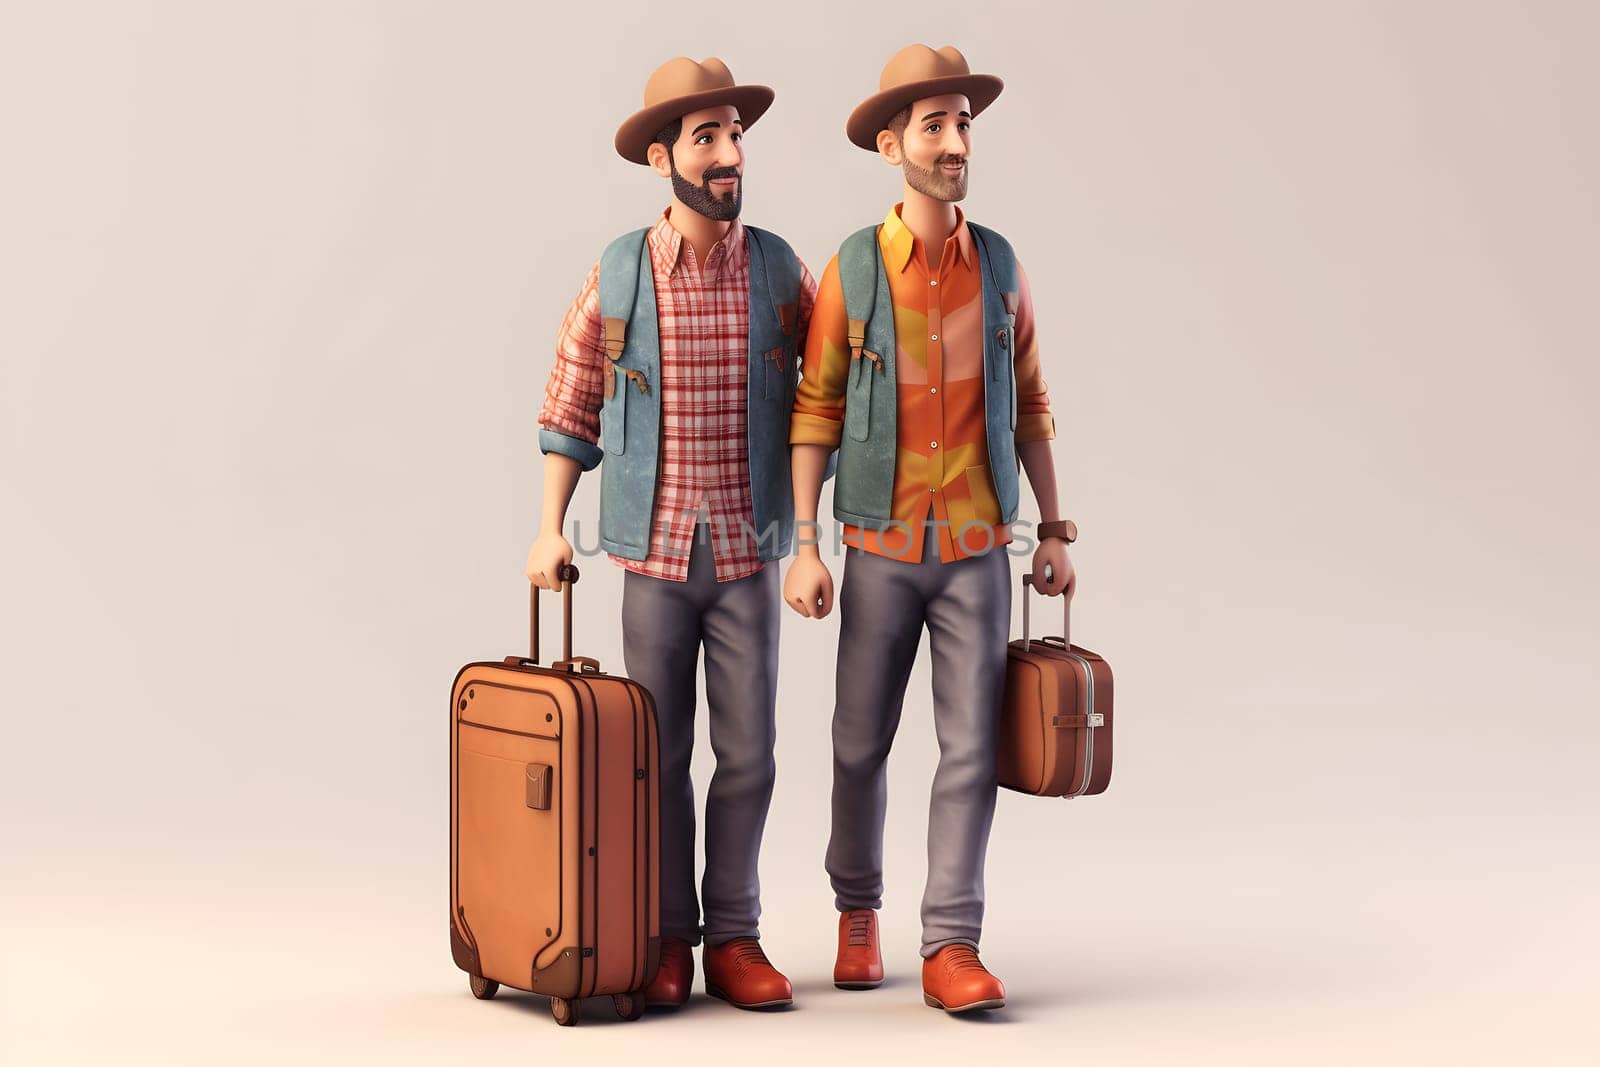 gay couple travelling with suitcases on light pink background. Neural network generated in May 2023. Not based on any actual person, scene or pattern.